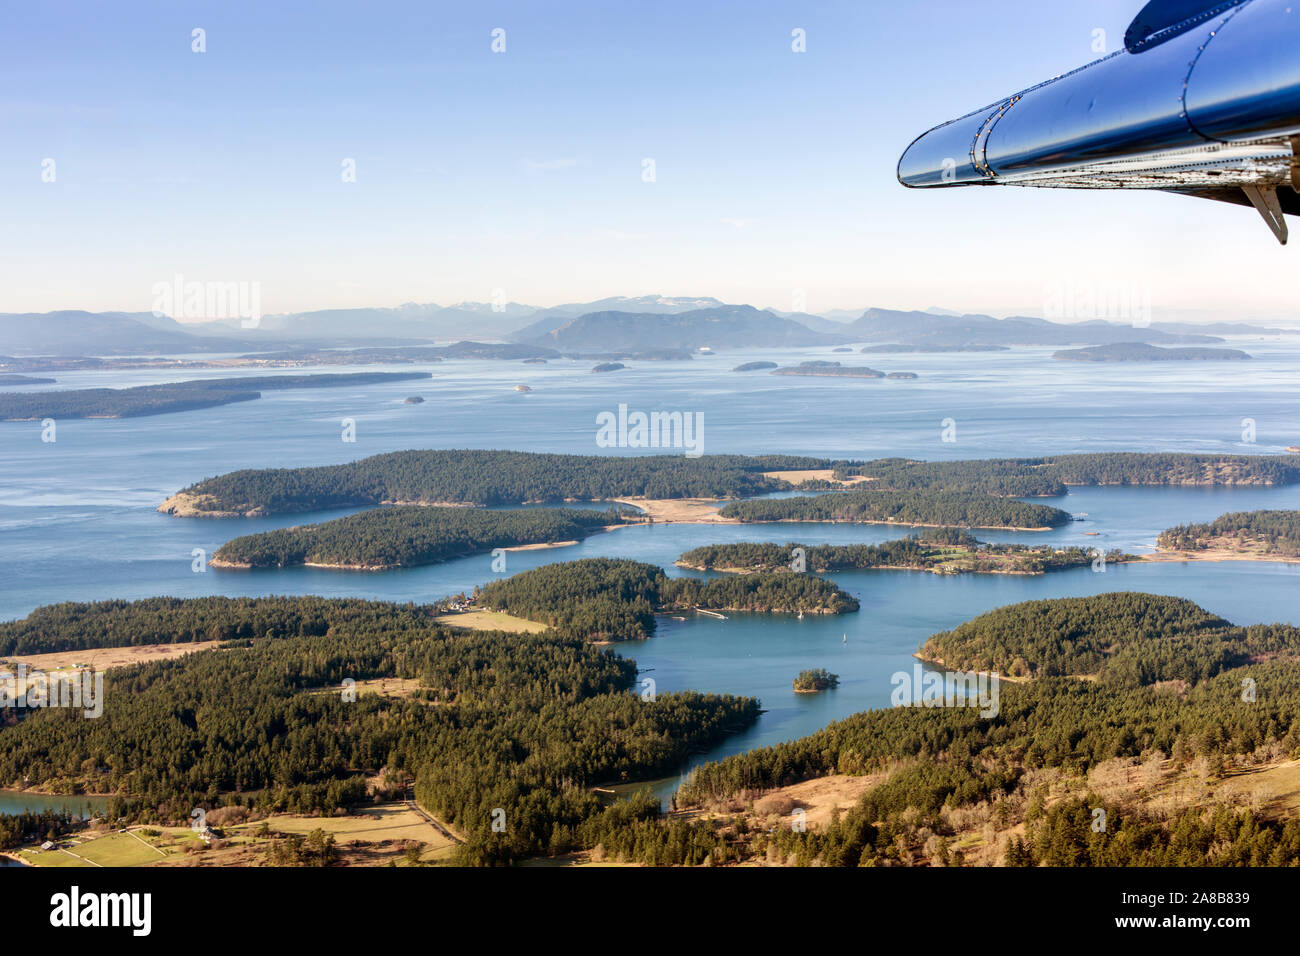 Stunning aerial view from a small airplane flying over Gulf Islands near town of White Rock, British Columbia Canada, heading to the city of Victoria Stock Photo